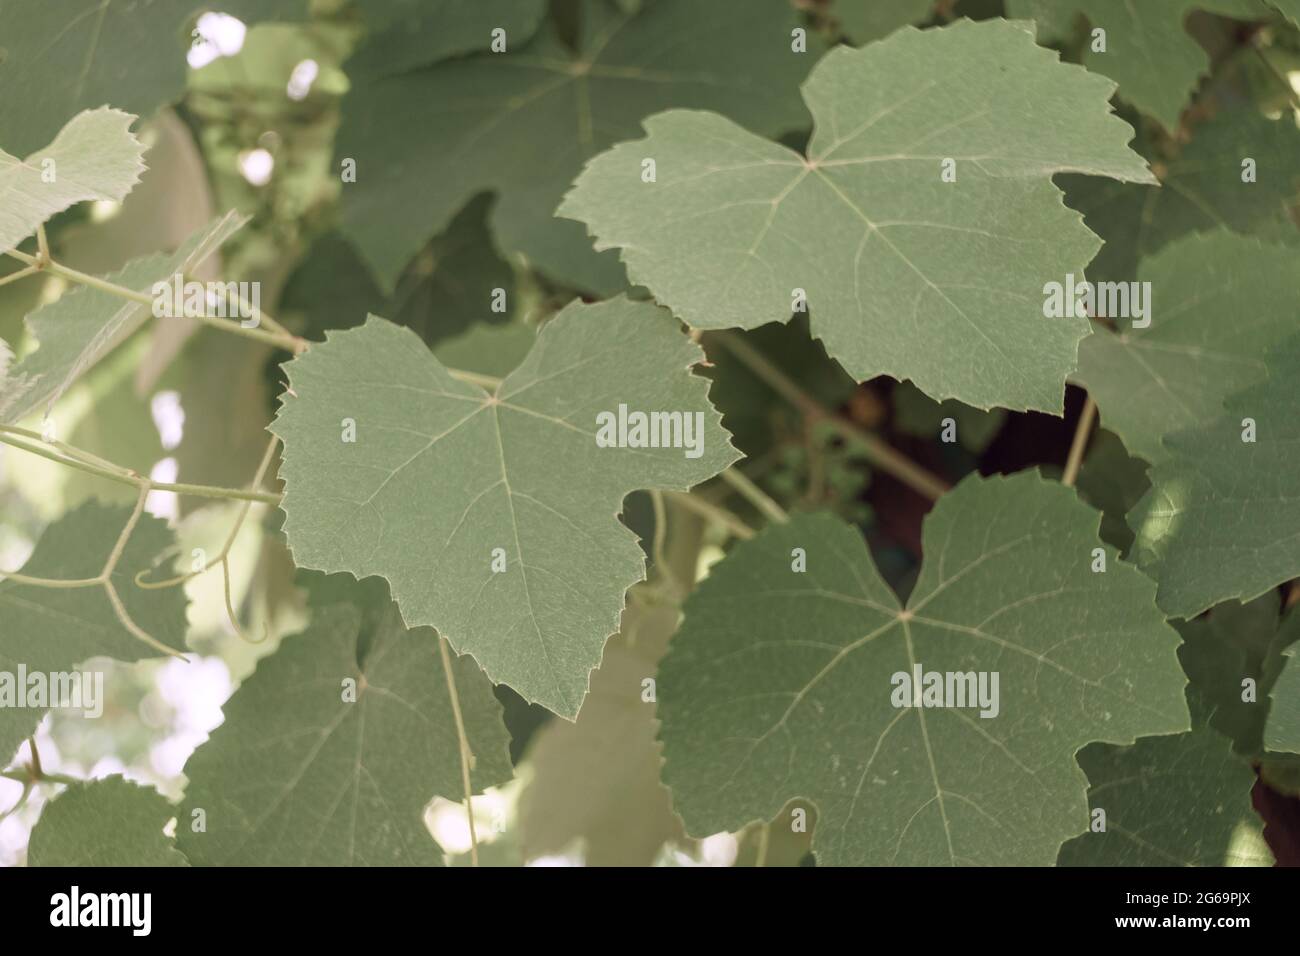 Beautifu grape leaf  pattern background texture for design. Macro photography view. Stock Photo